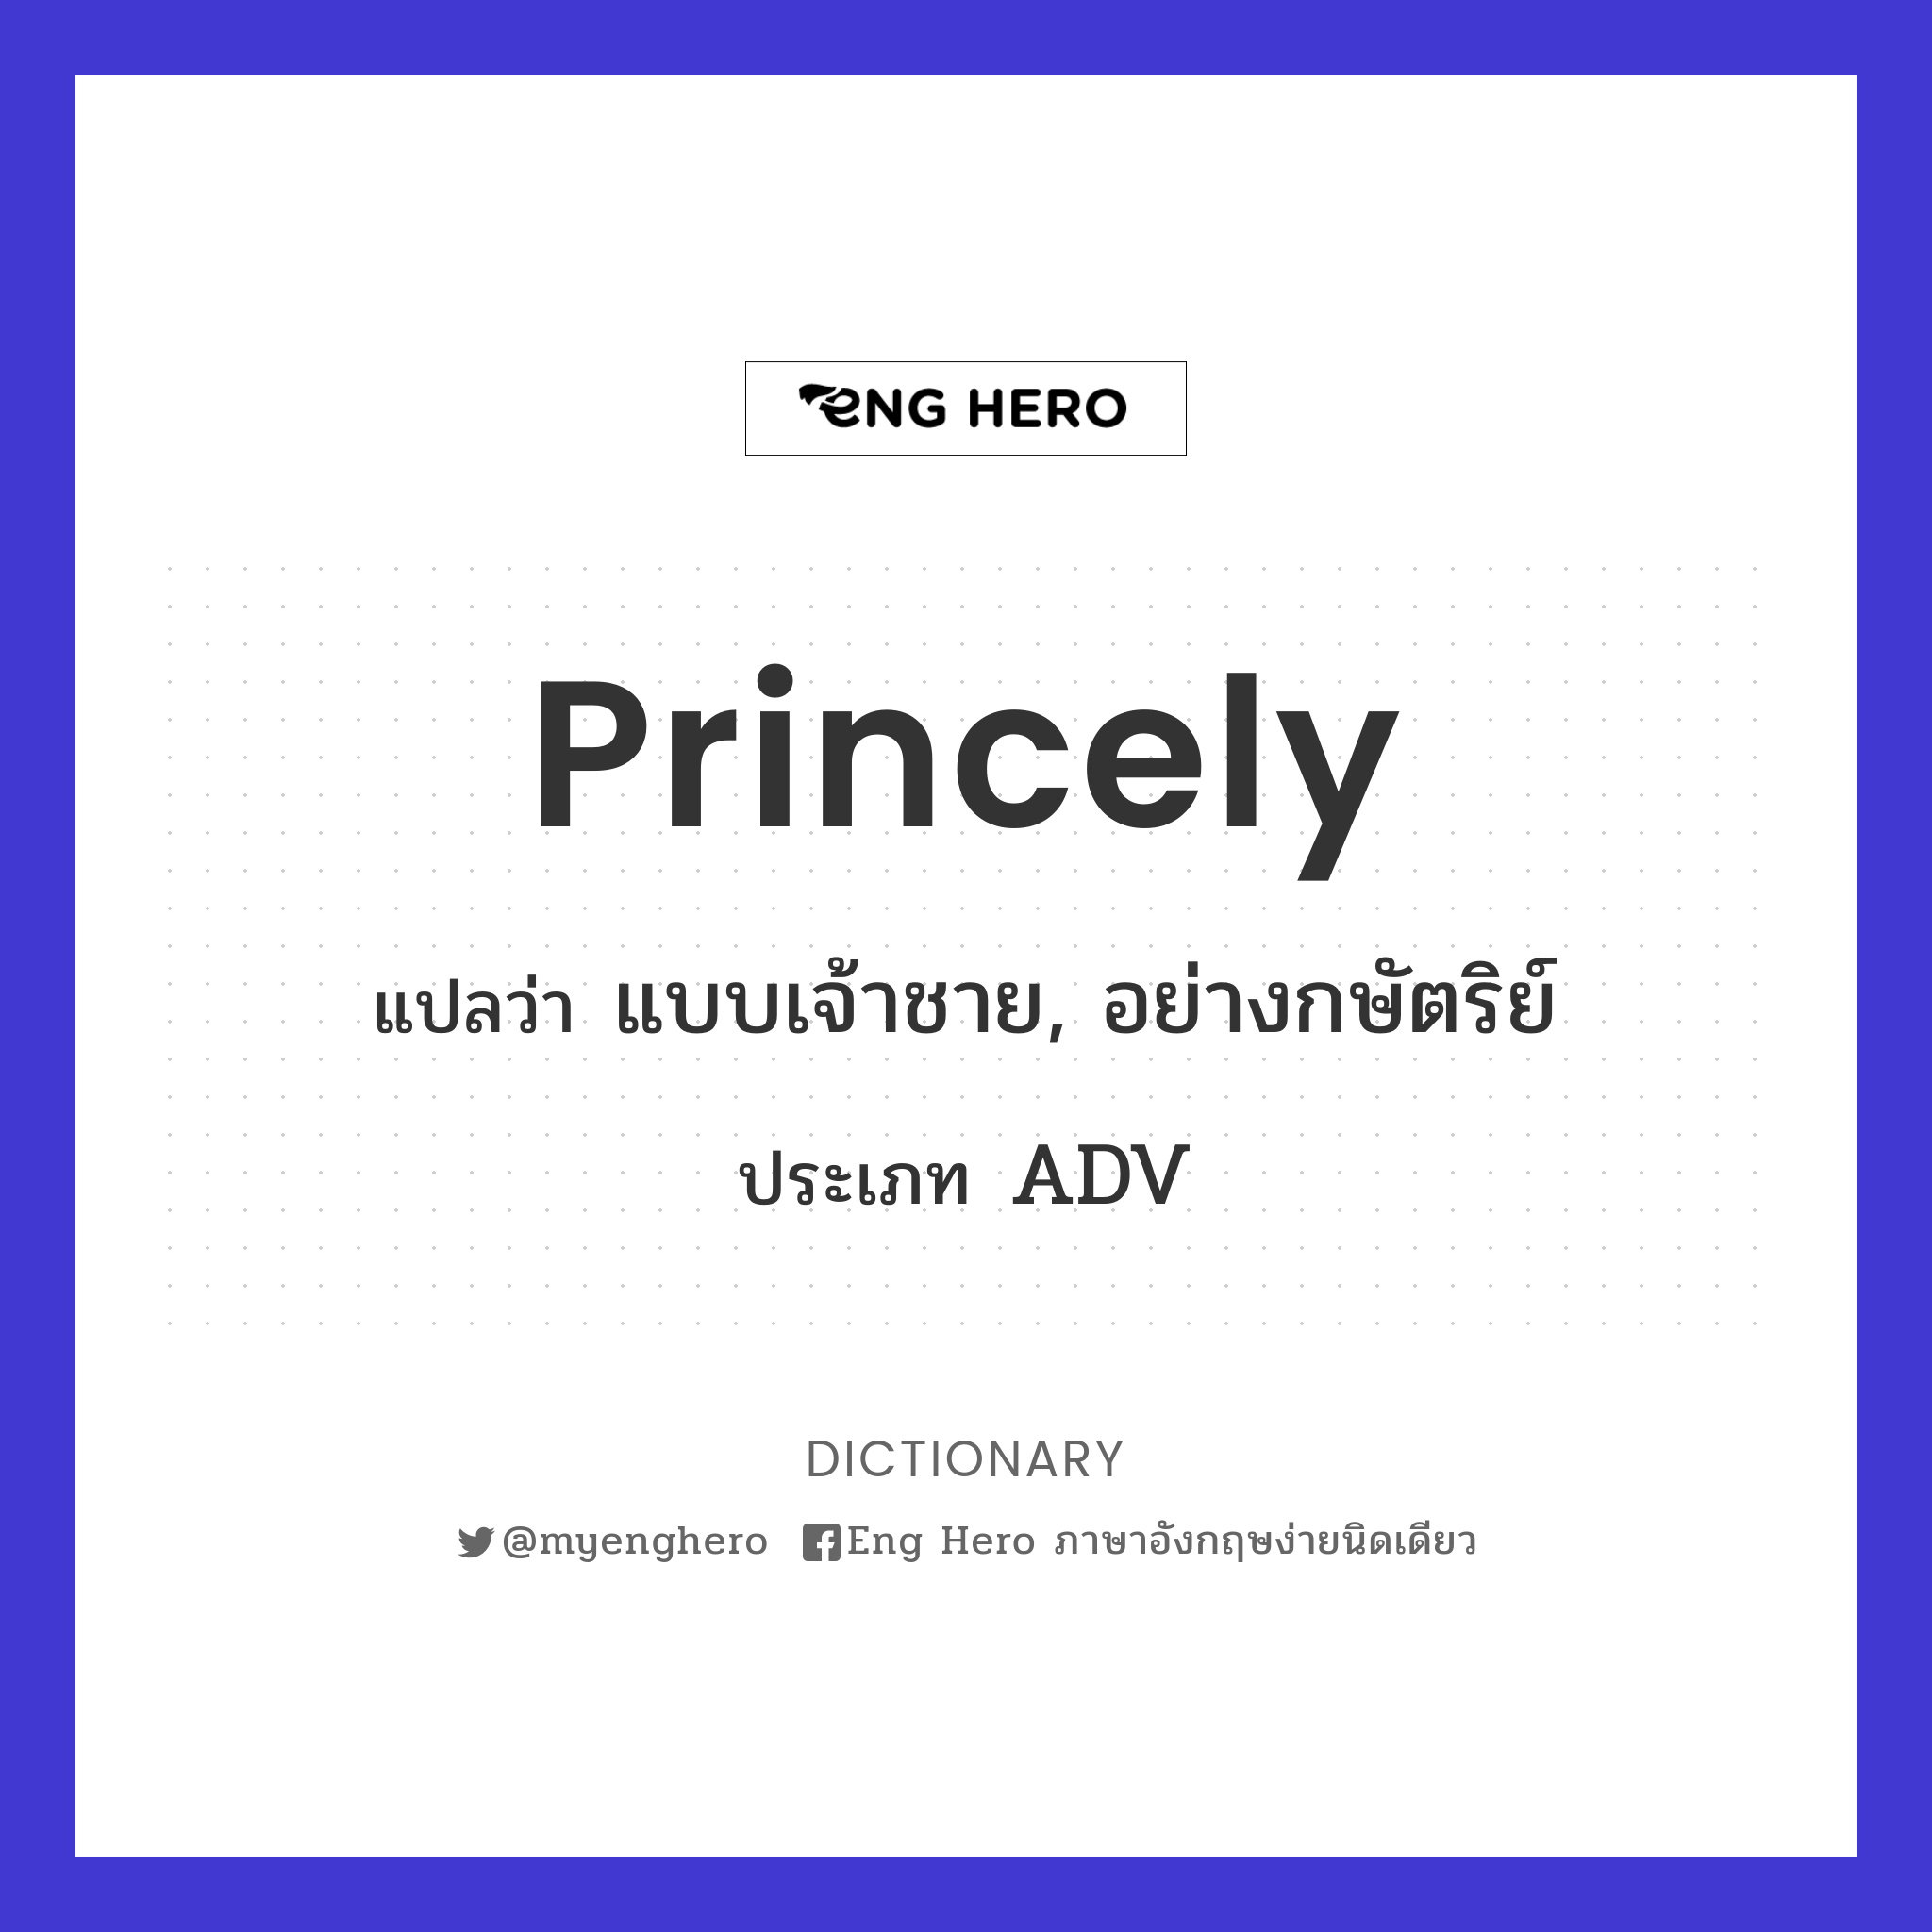 princely